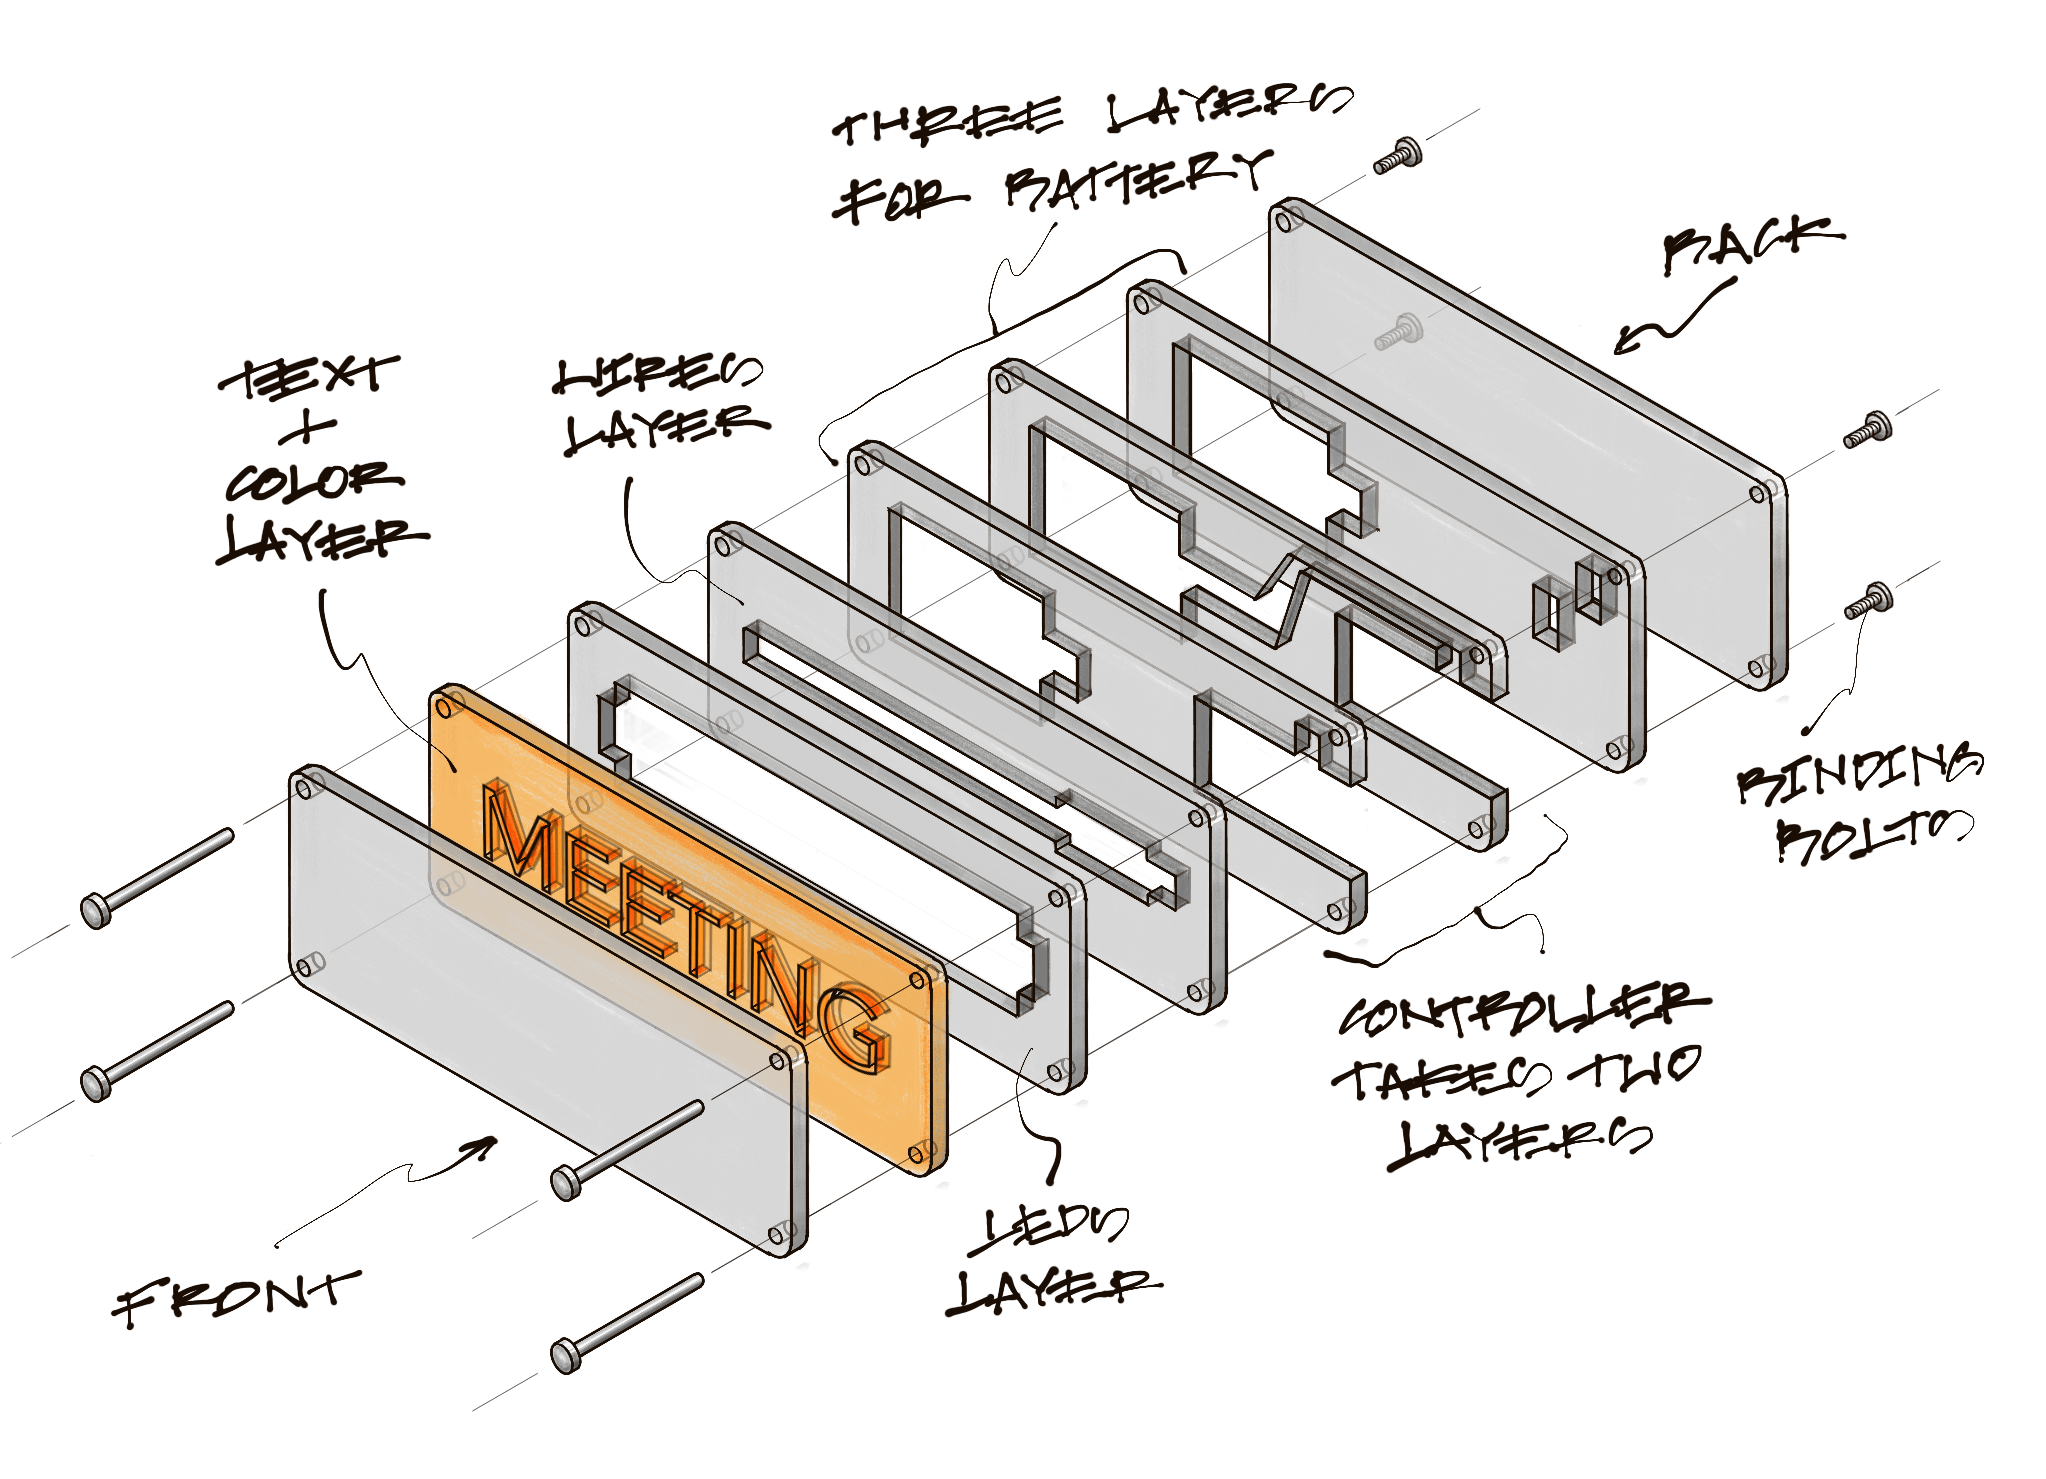 sketch of all internal layers of the device